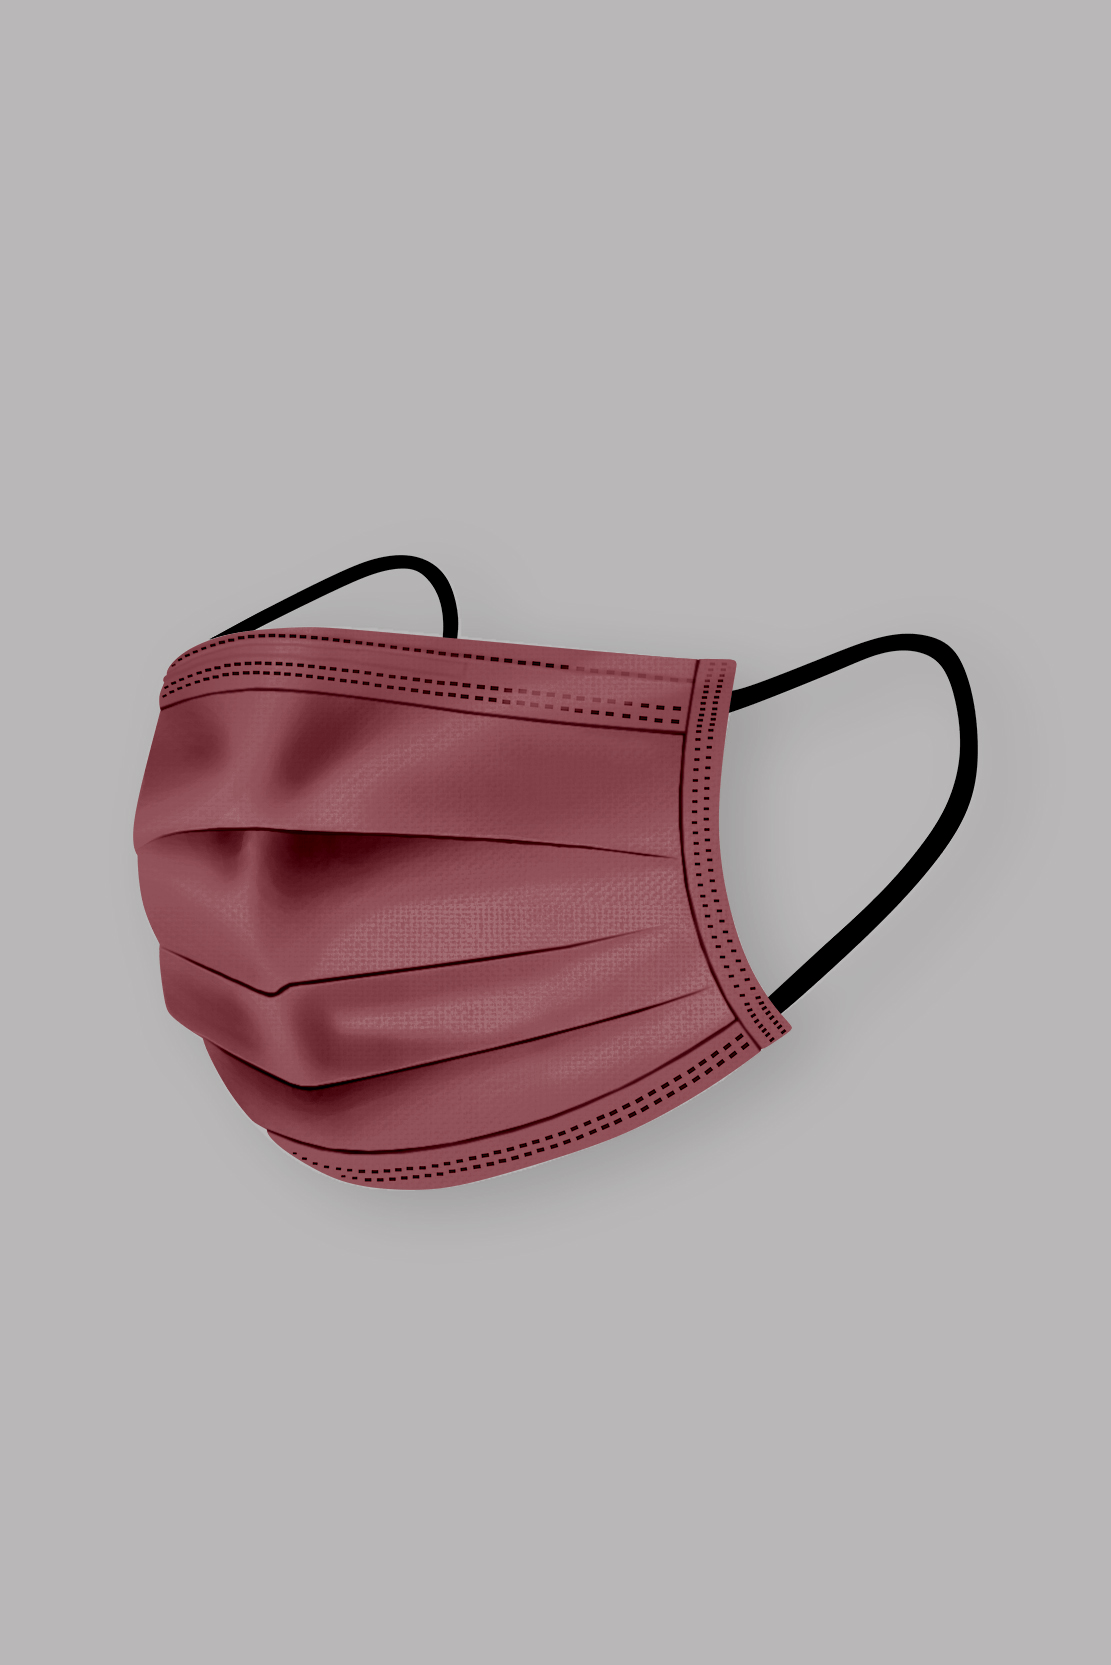 Stylish Dark Red Pleated face mask, with soft black ear loops and high quality fabric. 